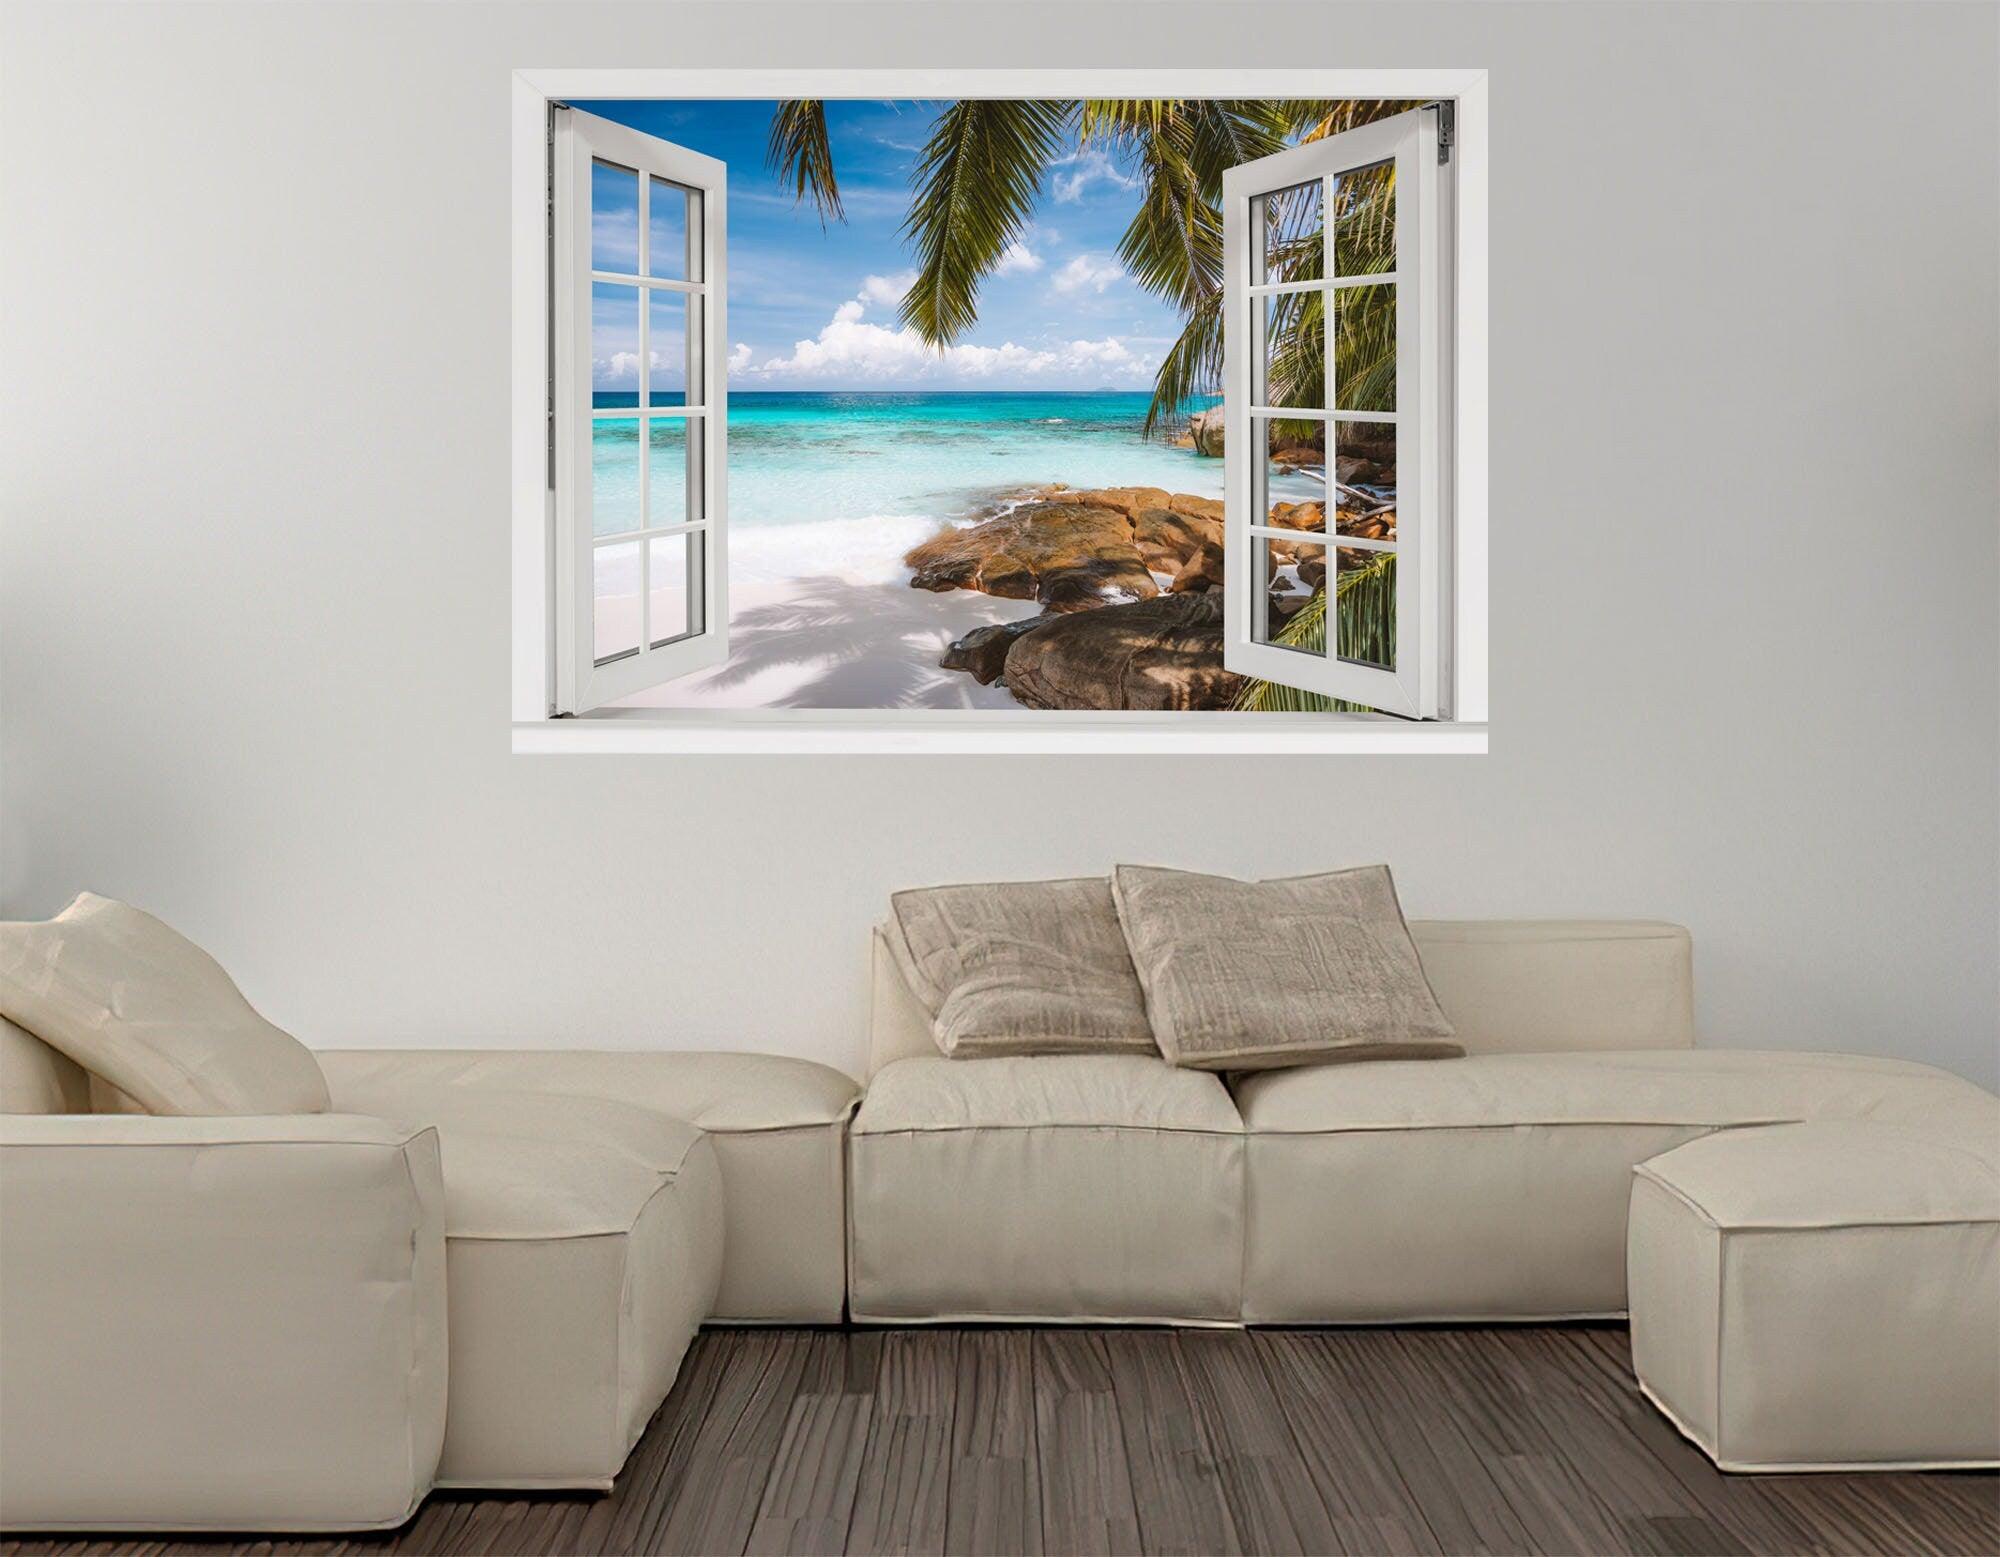 Window Scape Tropical #7 Window Decal Sticker Mural Beach Removable Fabric Window Frame Office Bedroom 3D